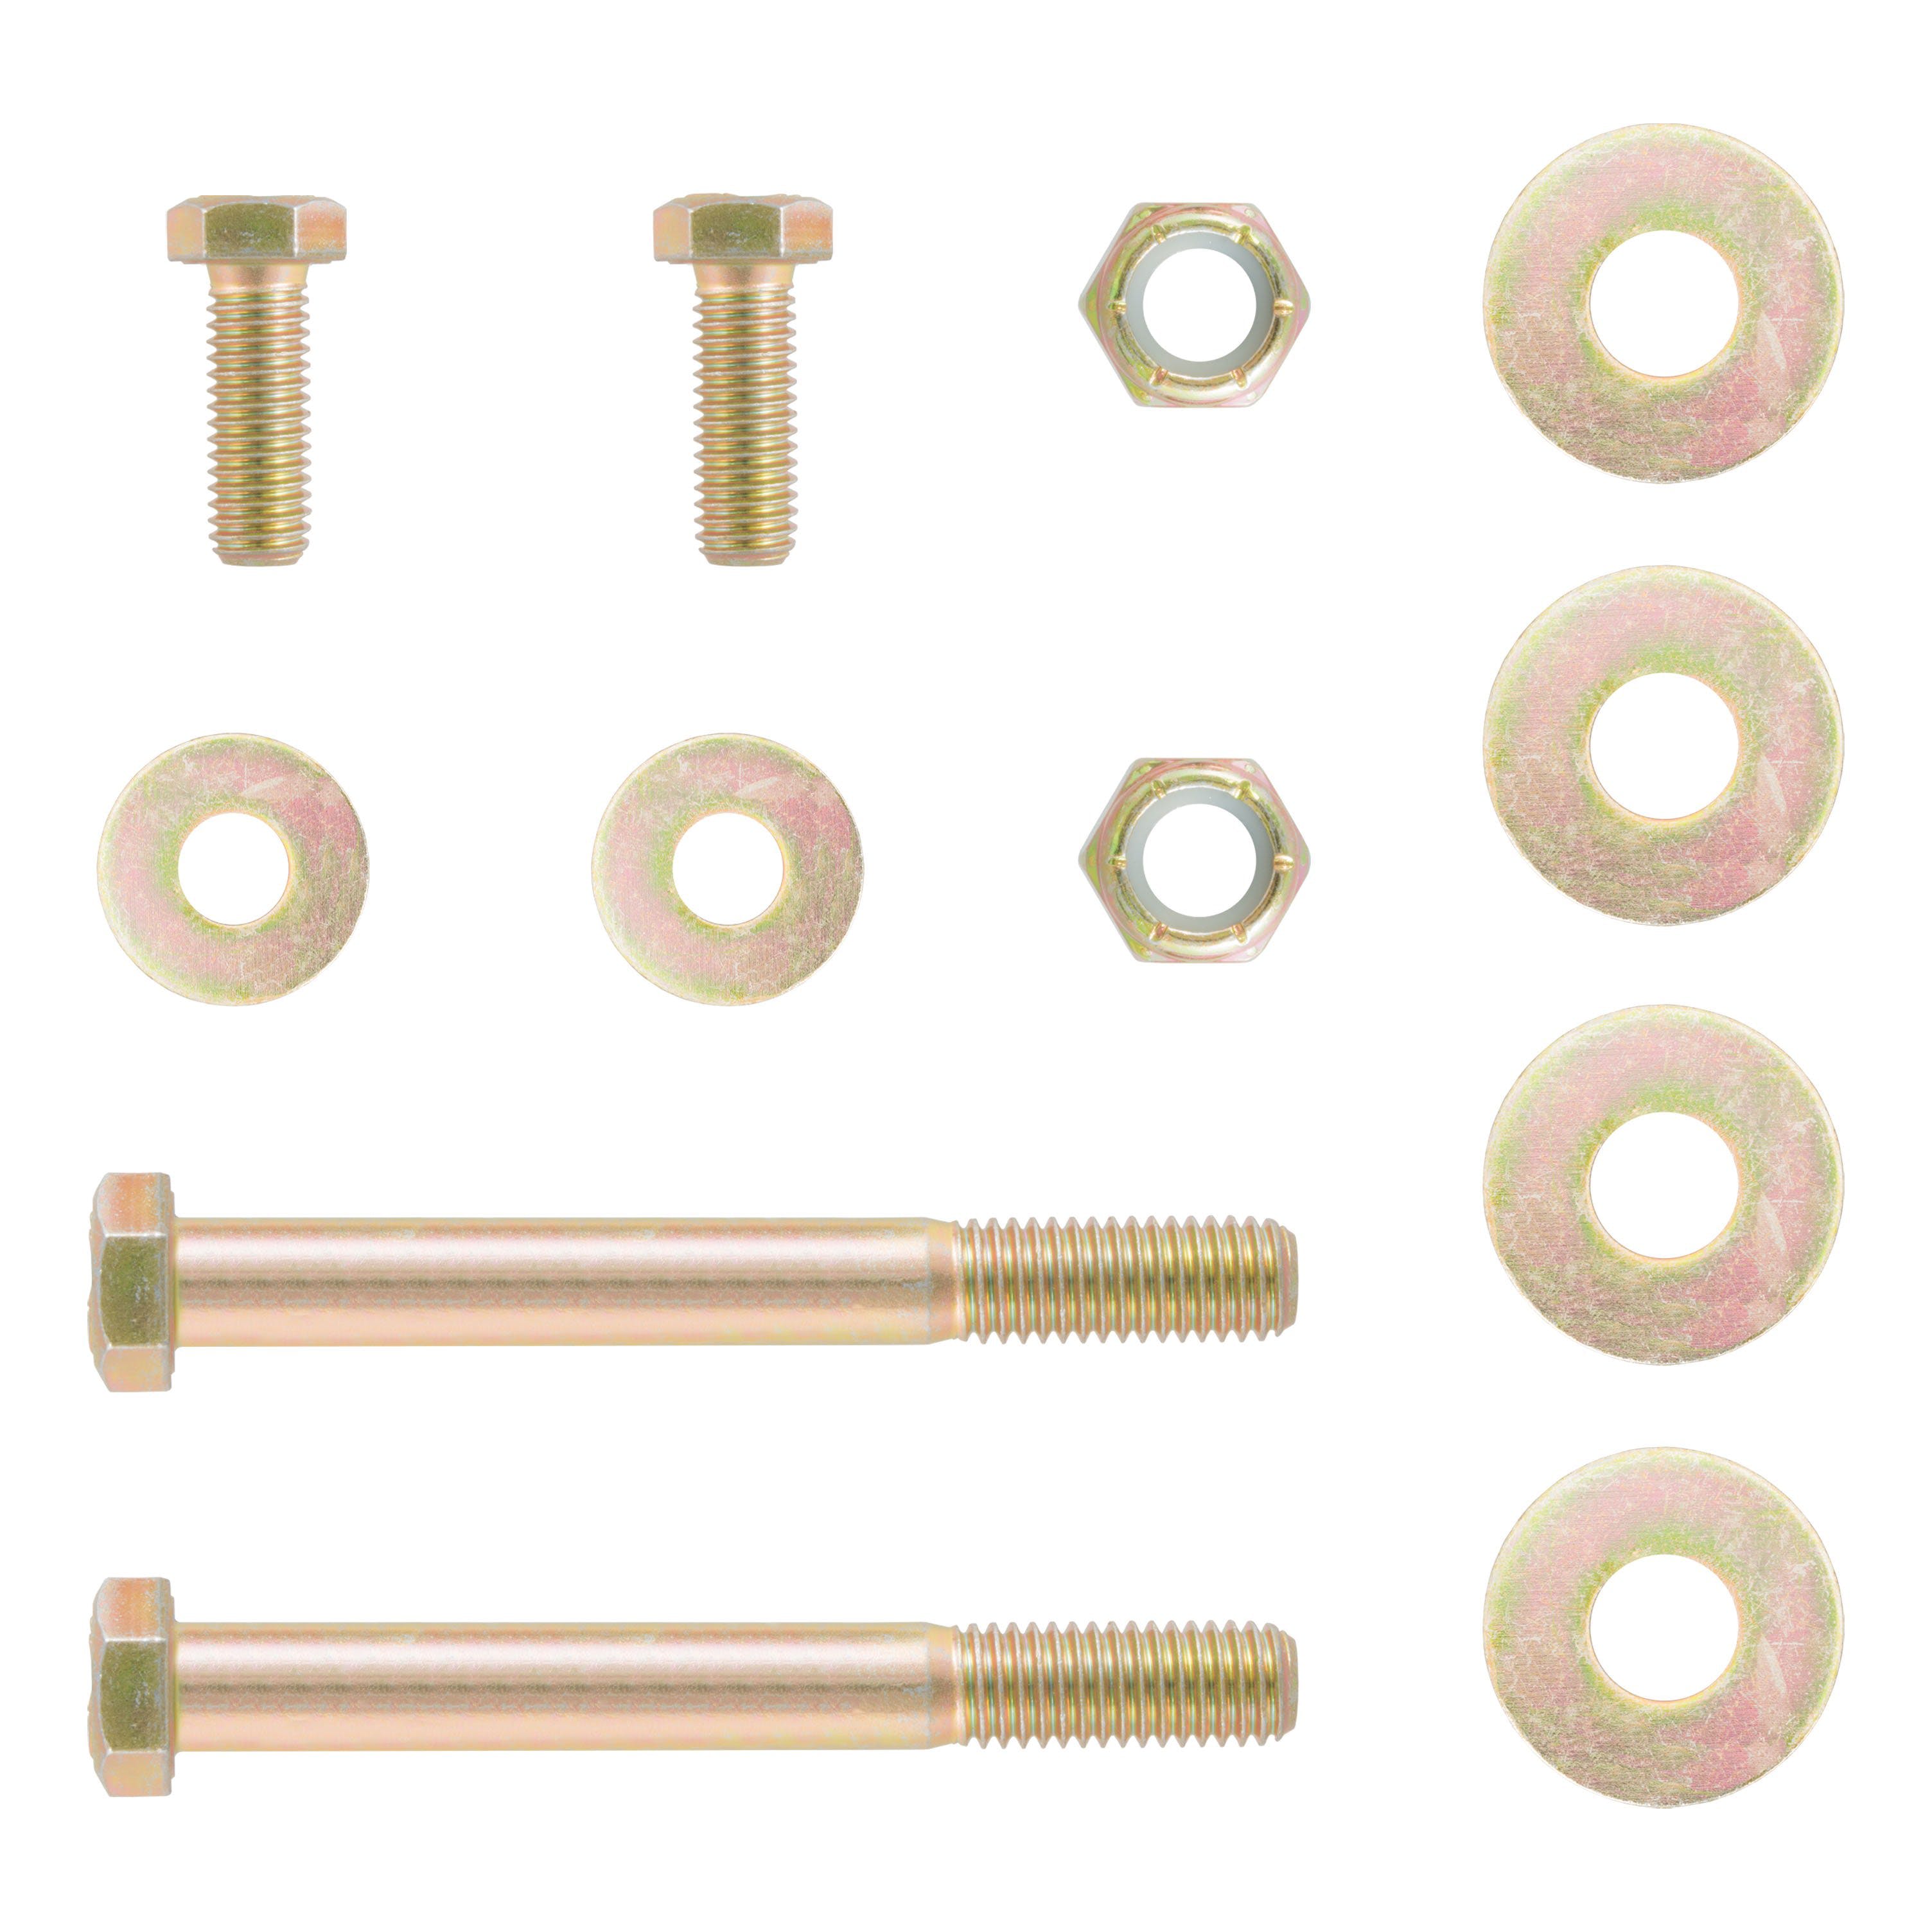 CURT 48621 Channel-Style Lunette Ring Hardware Kit